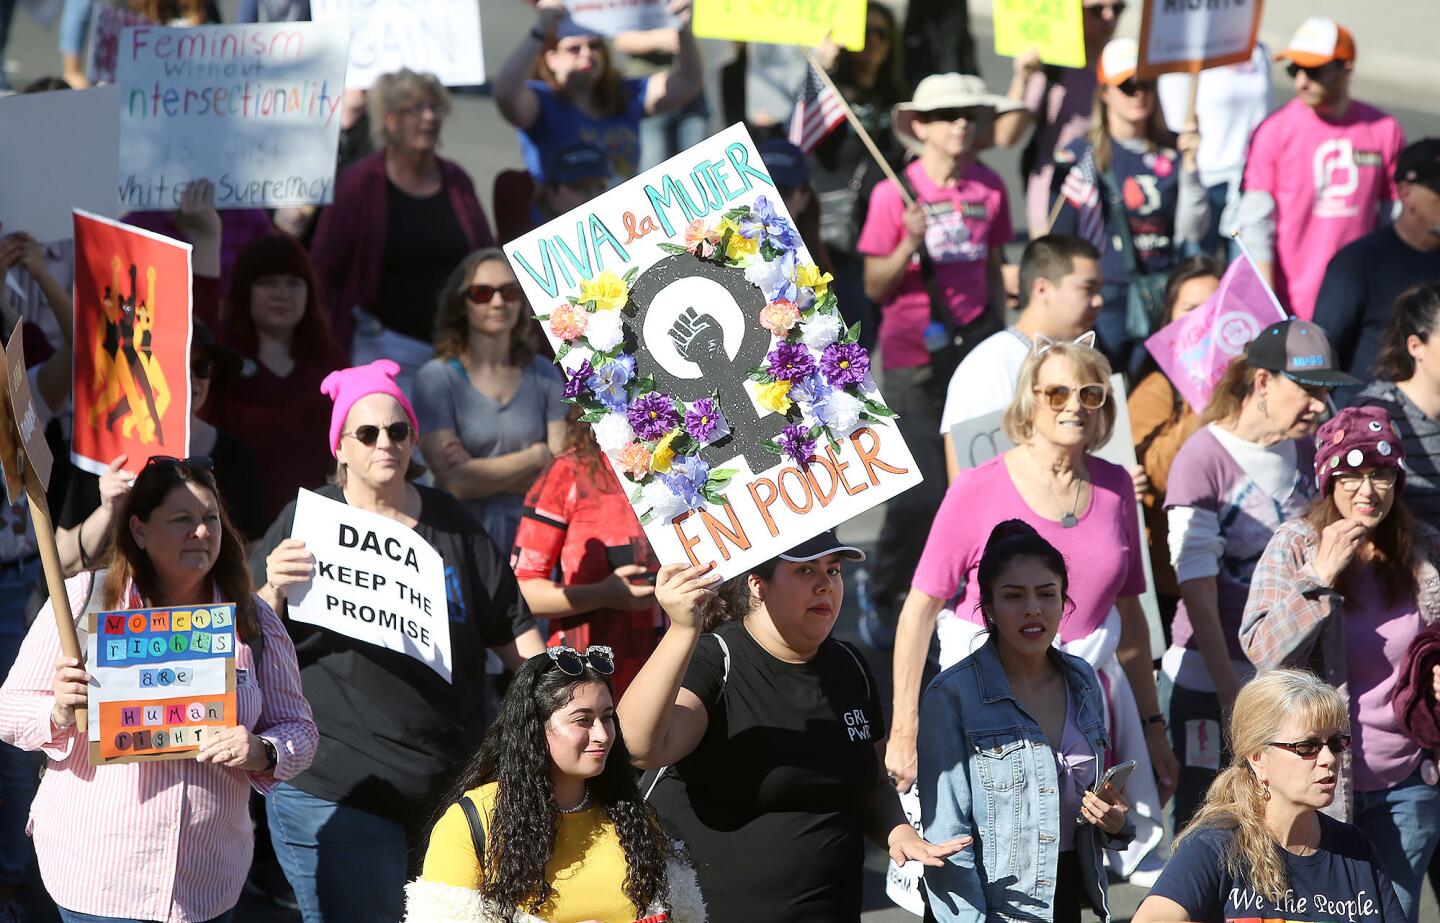 A mass of marchers, signs held high, proceed down Civic Center Drive. Demonstrators were participating in last week's Orange County Women's March in downtown Santa Ana.